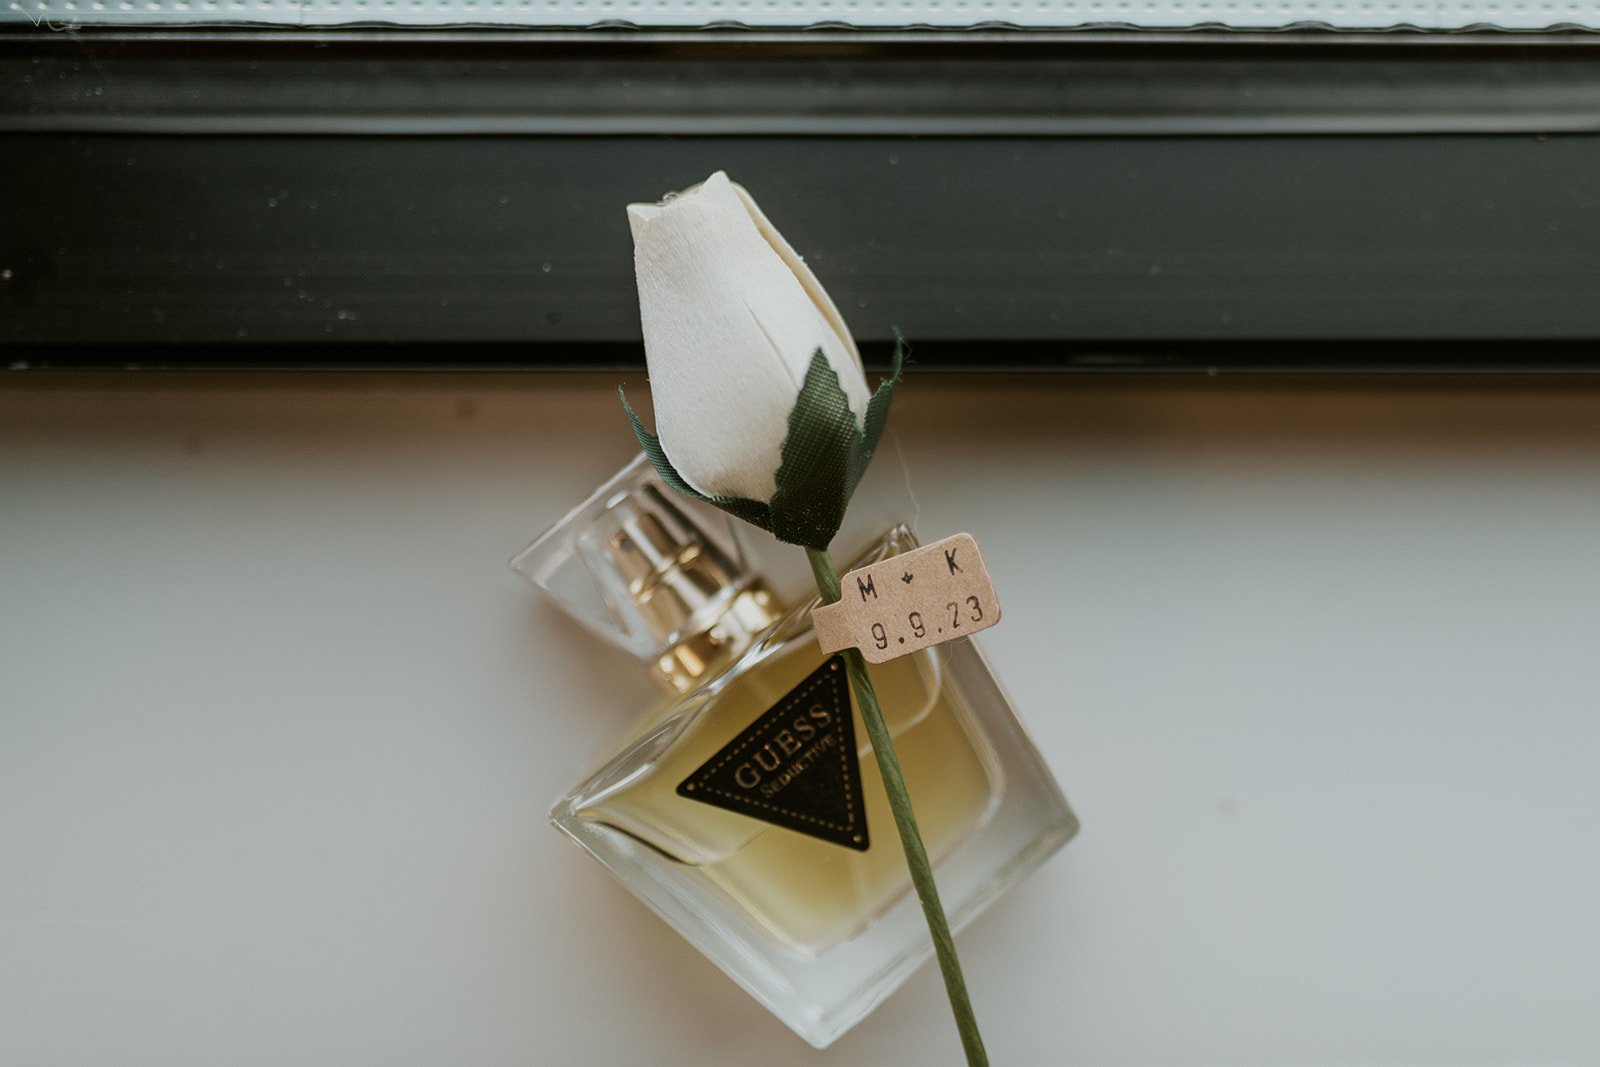 The bridal perfume and one white rose. 